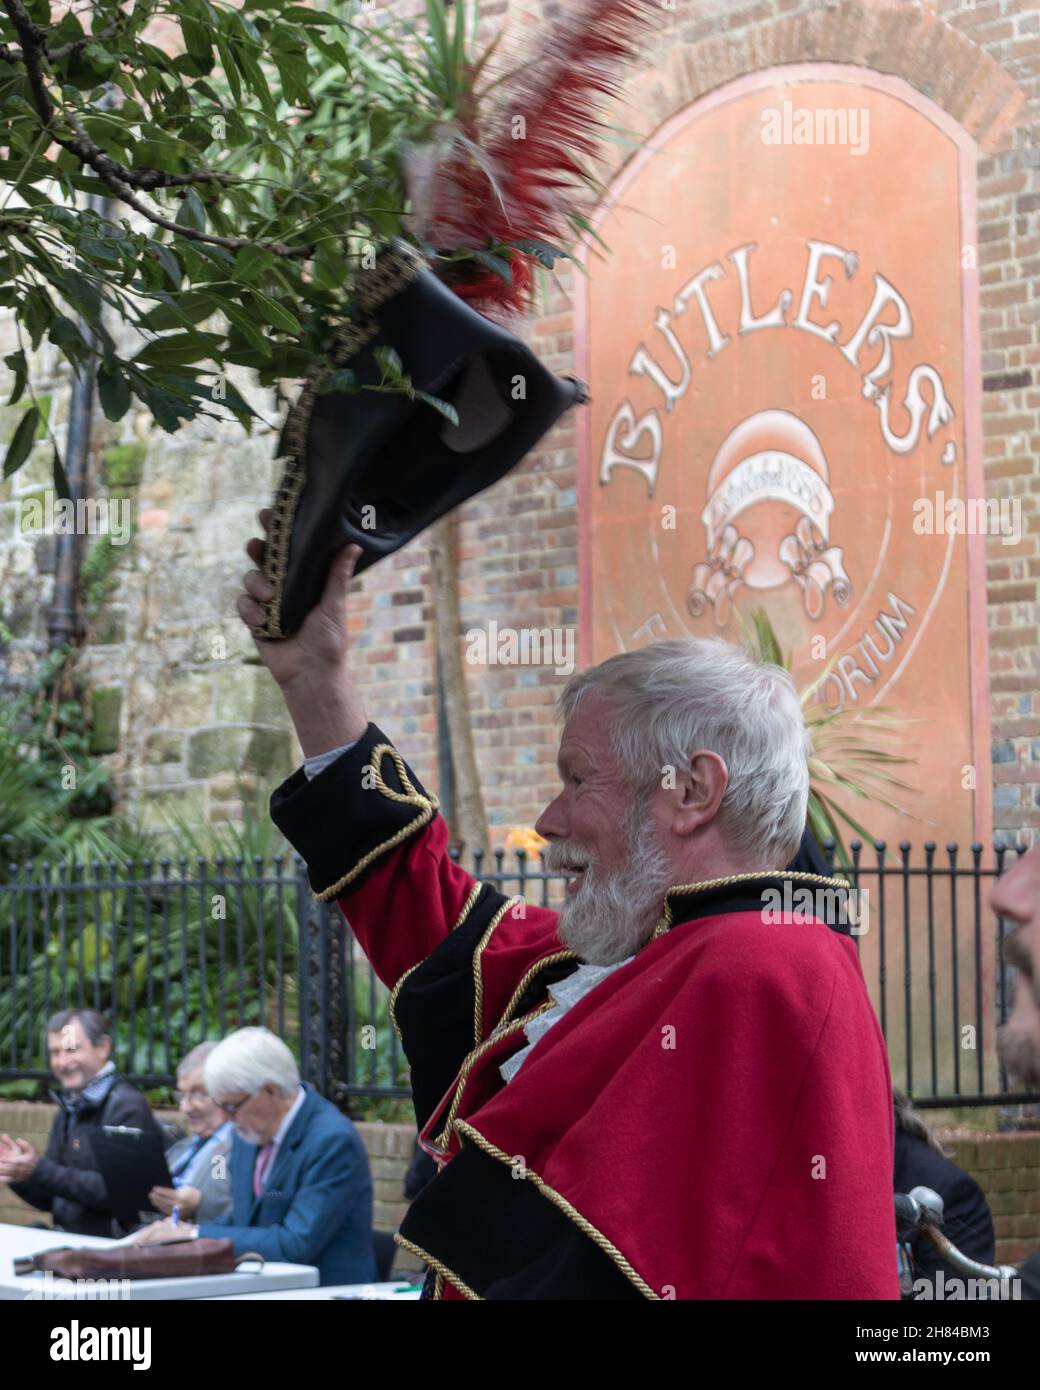 A man dressed as a town crier in the uk, wearing a red cloak with black and gold trim and a black tricorn hat with a peacock feather. White beard. Stock Photo